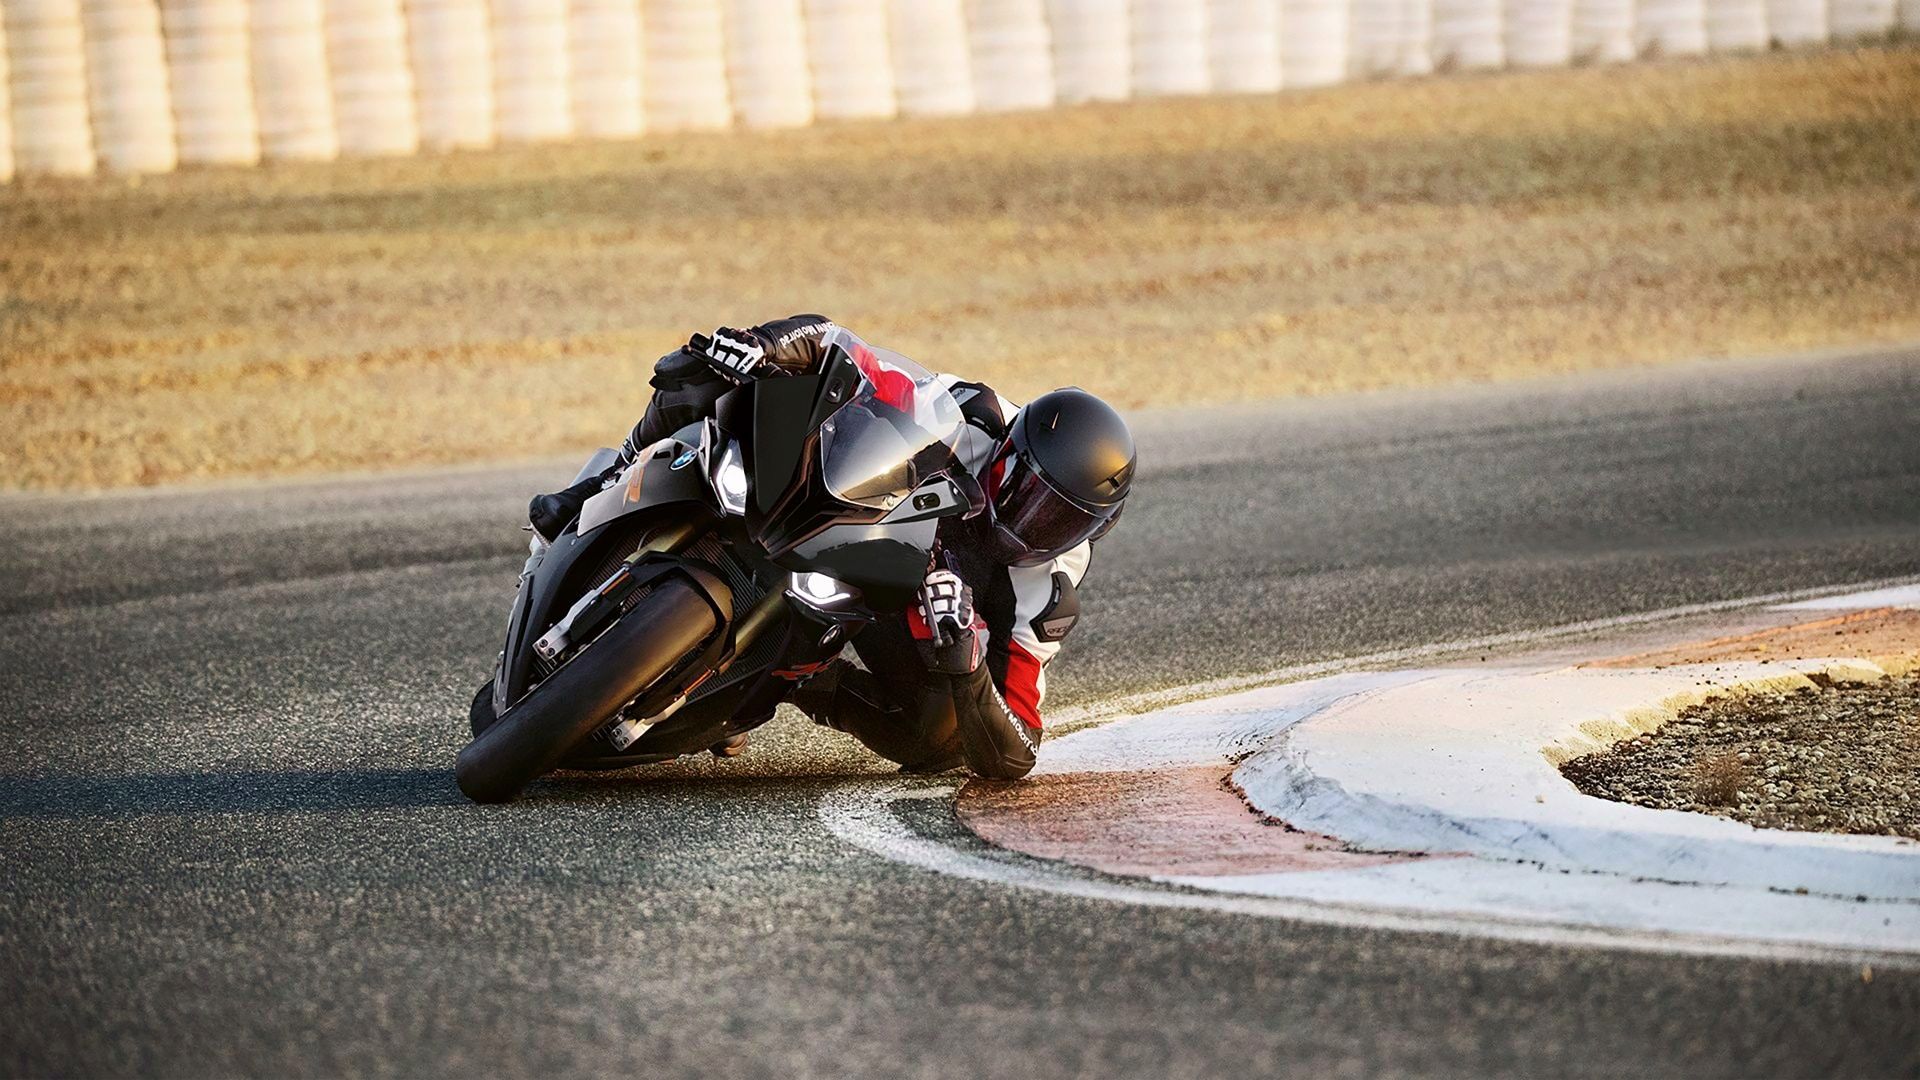 Sport World rider at the track.